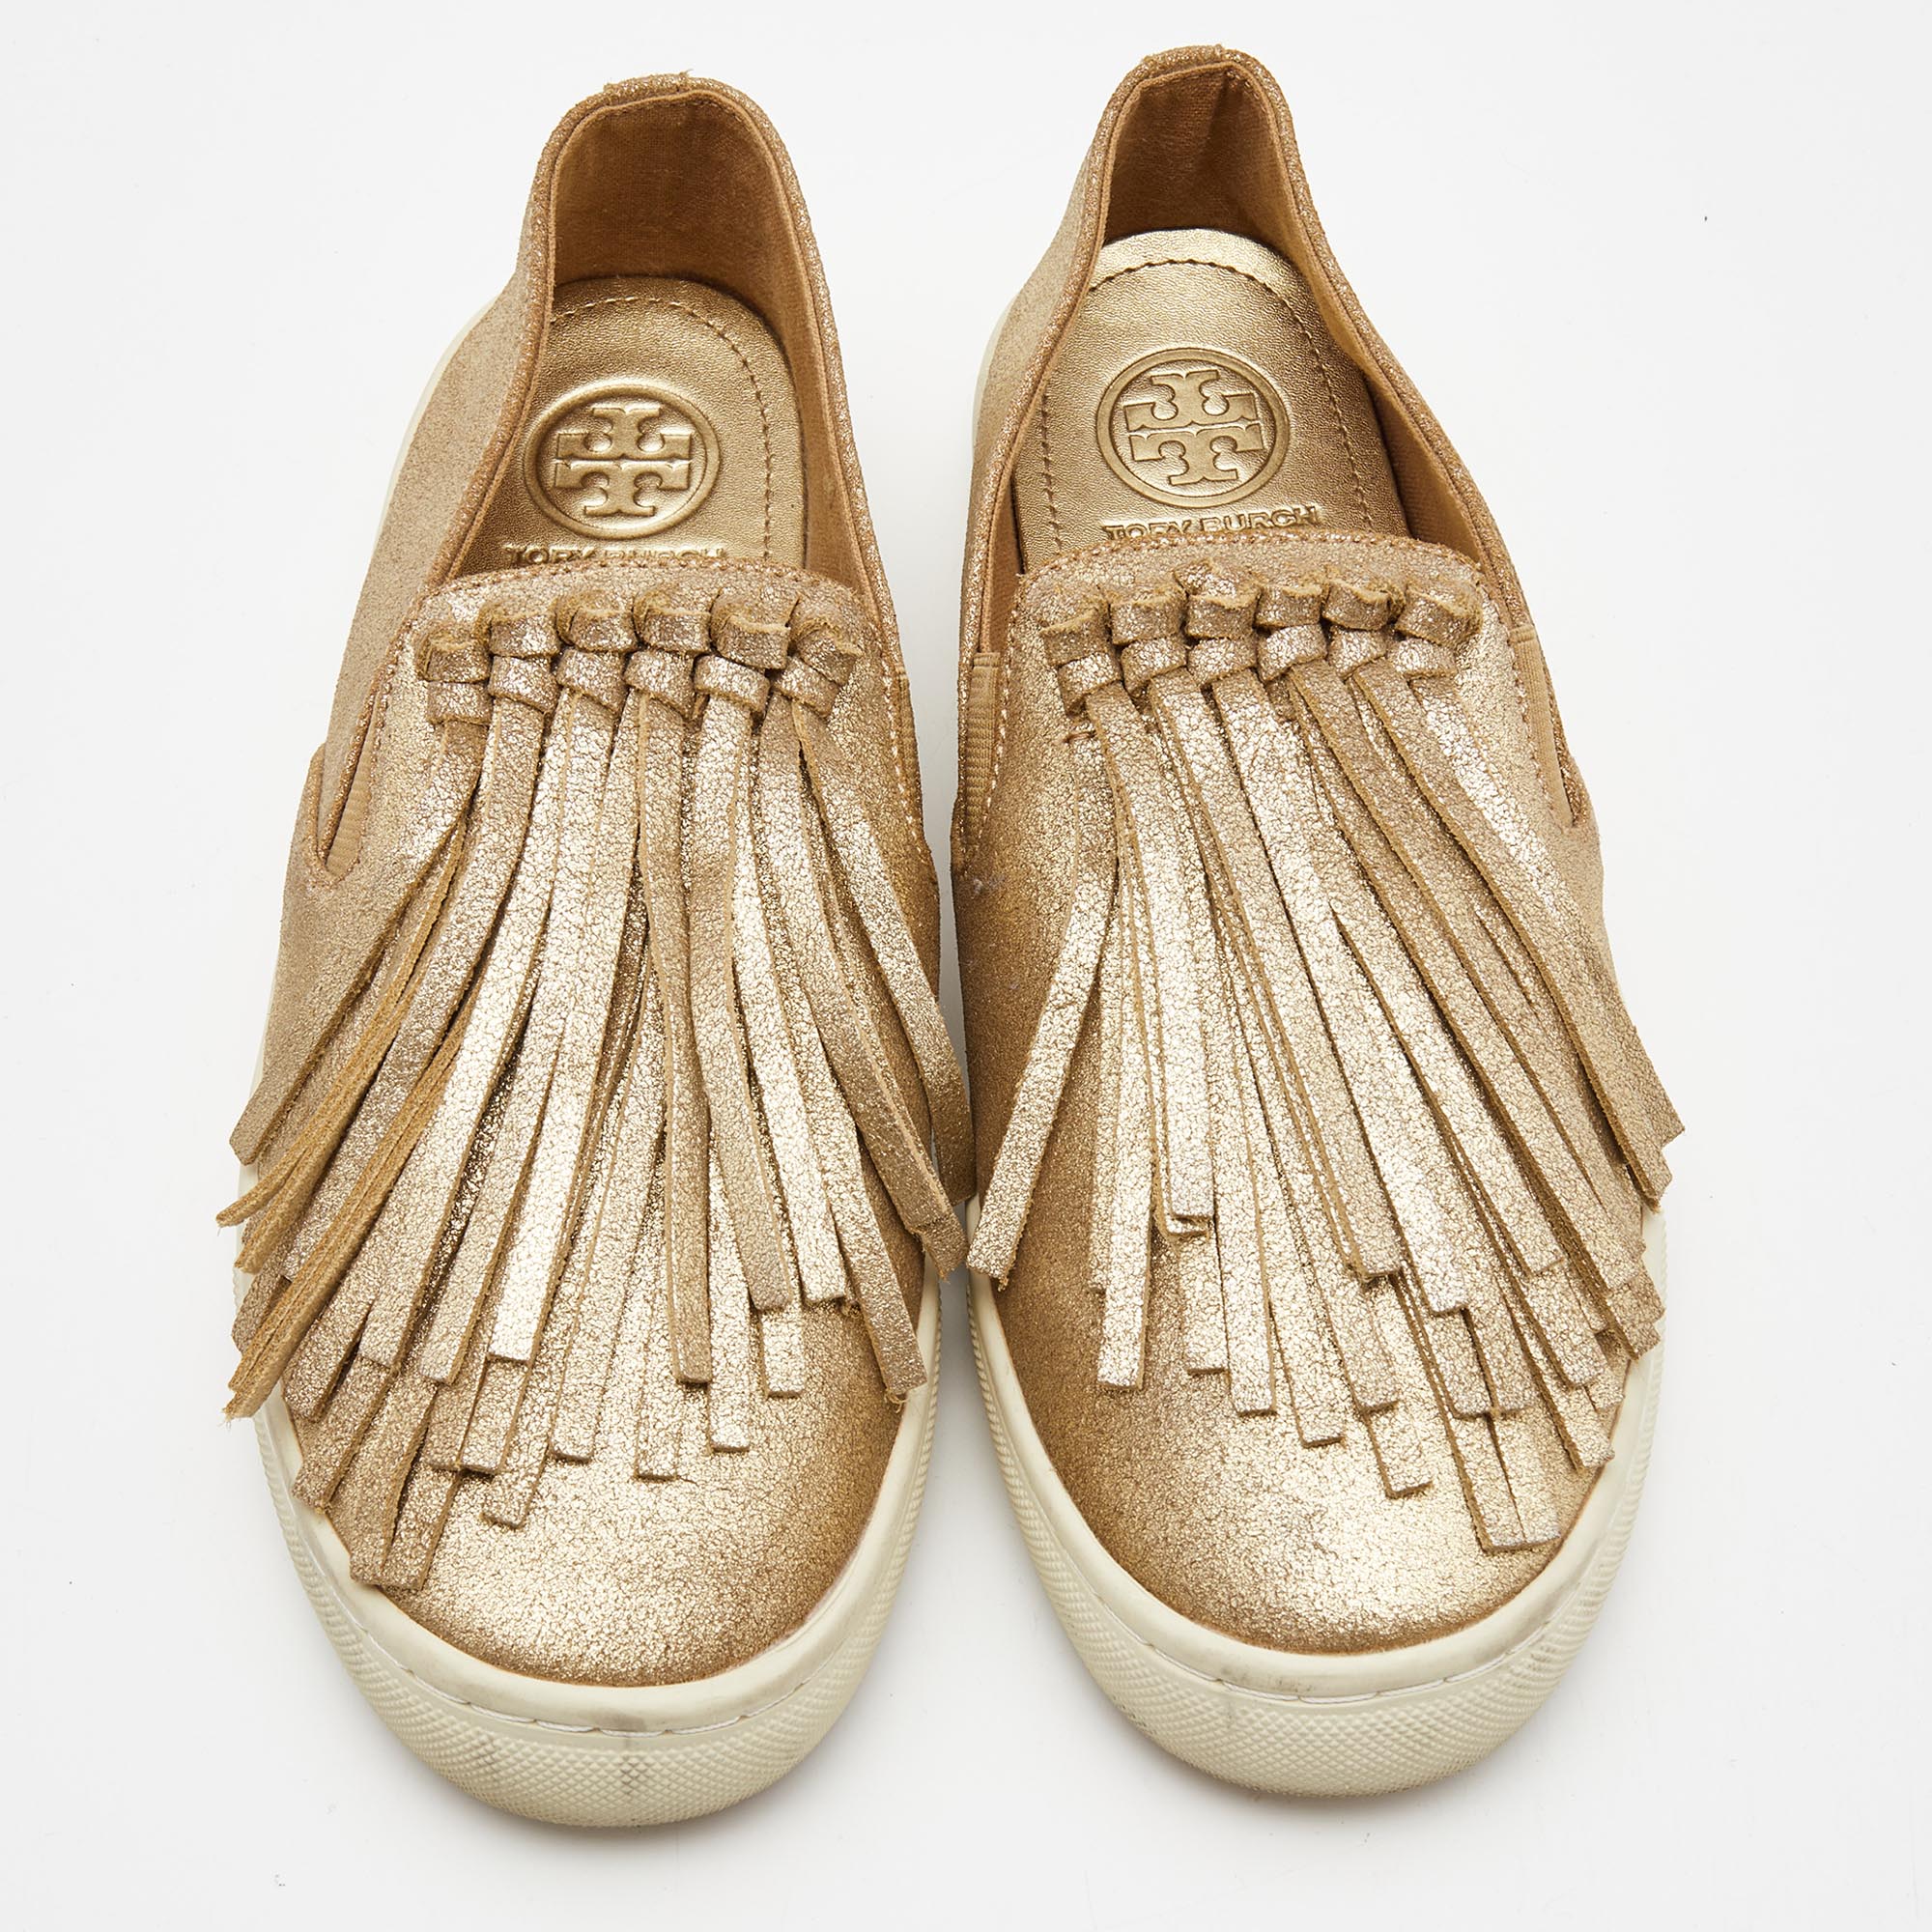 Tory Burch Metallic Gold Leather Fringe Slip On Sneakers Size 38.5